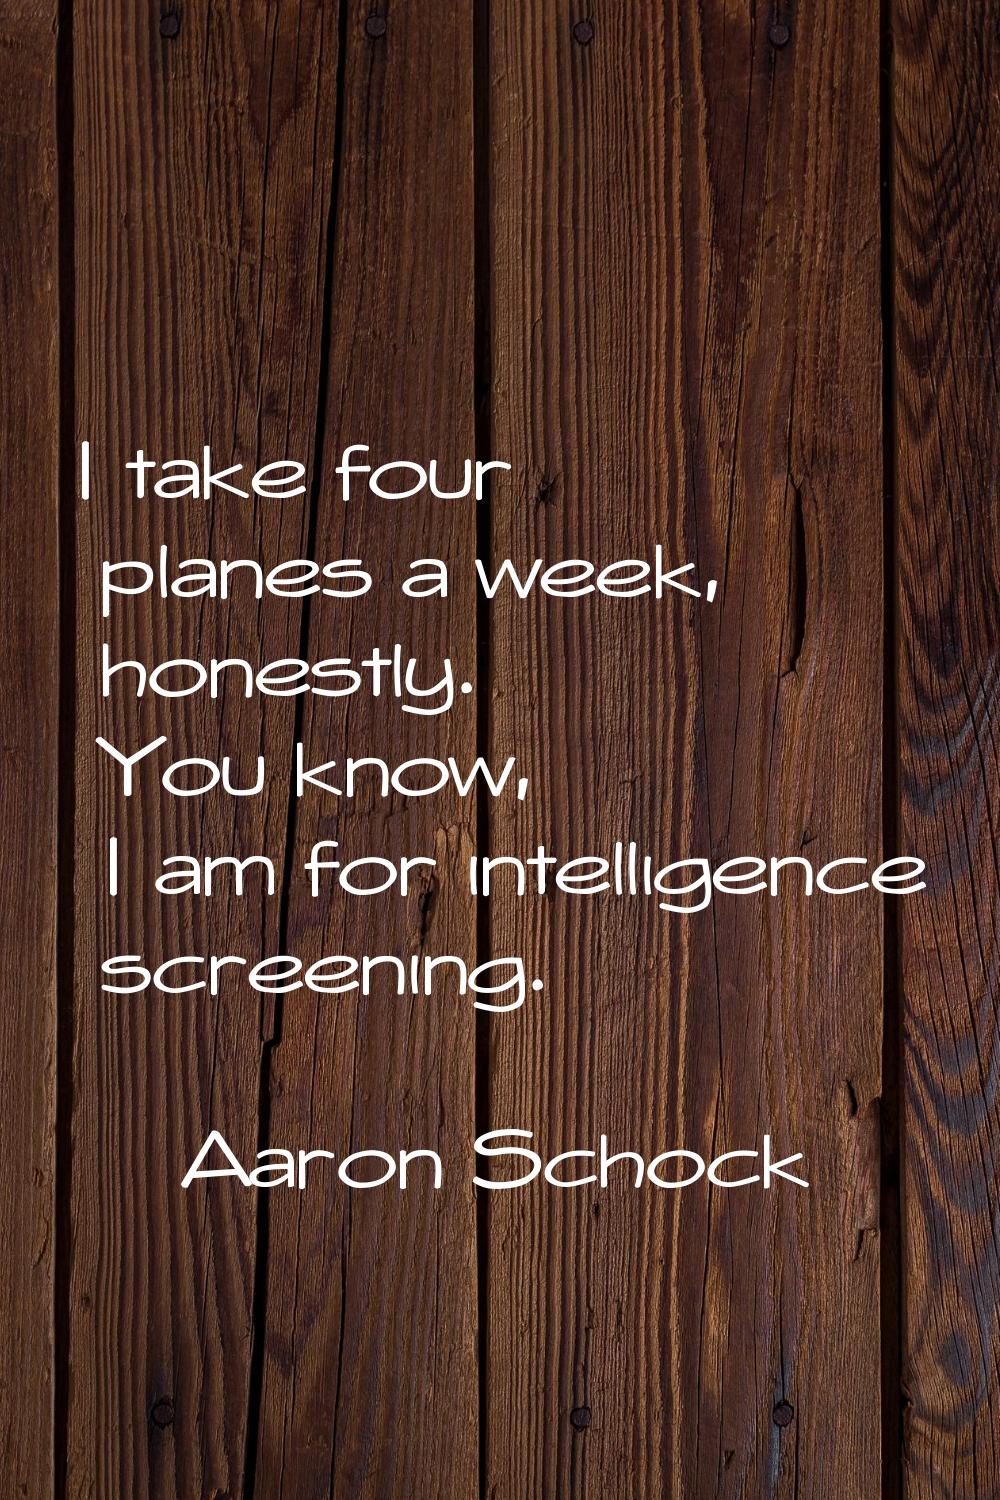 I take four planes a week, honestly. You know, I am for intelligence screening.